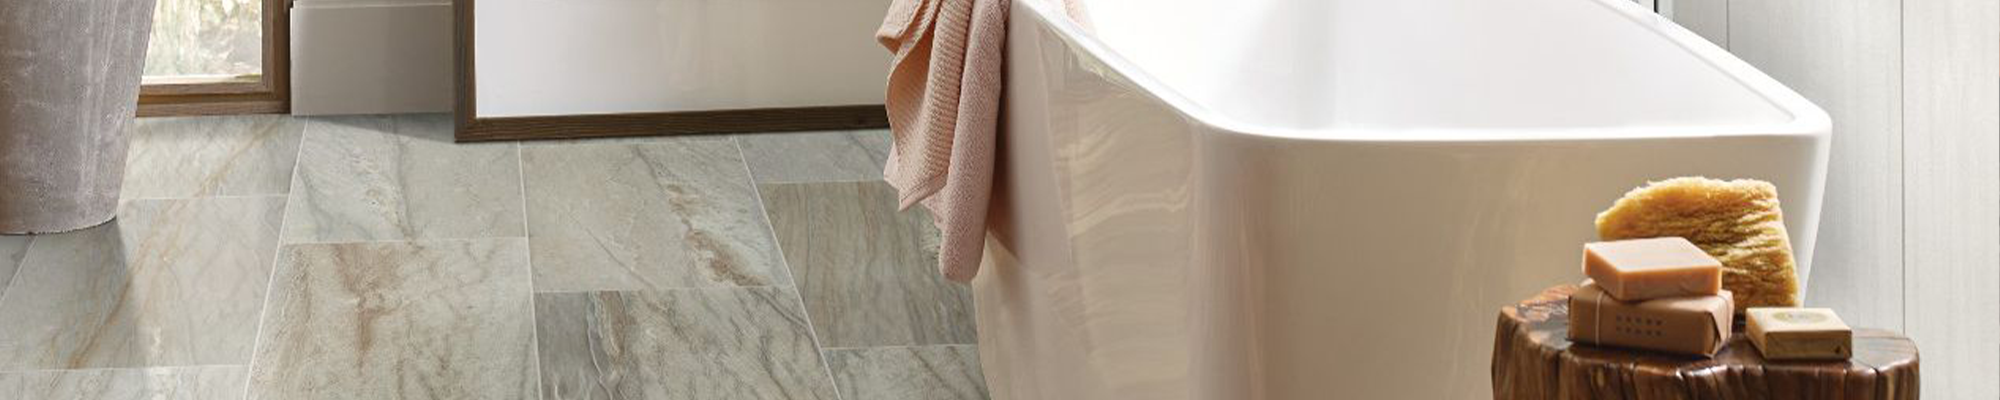 bathtub and stool with soap on tile floor